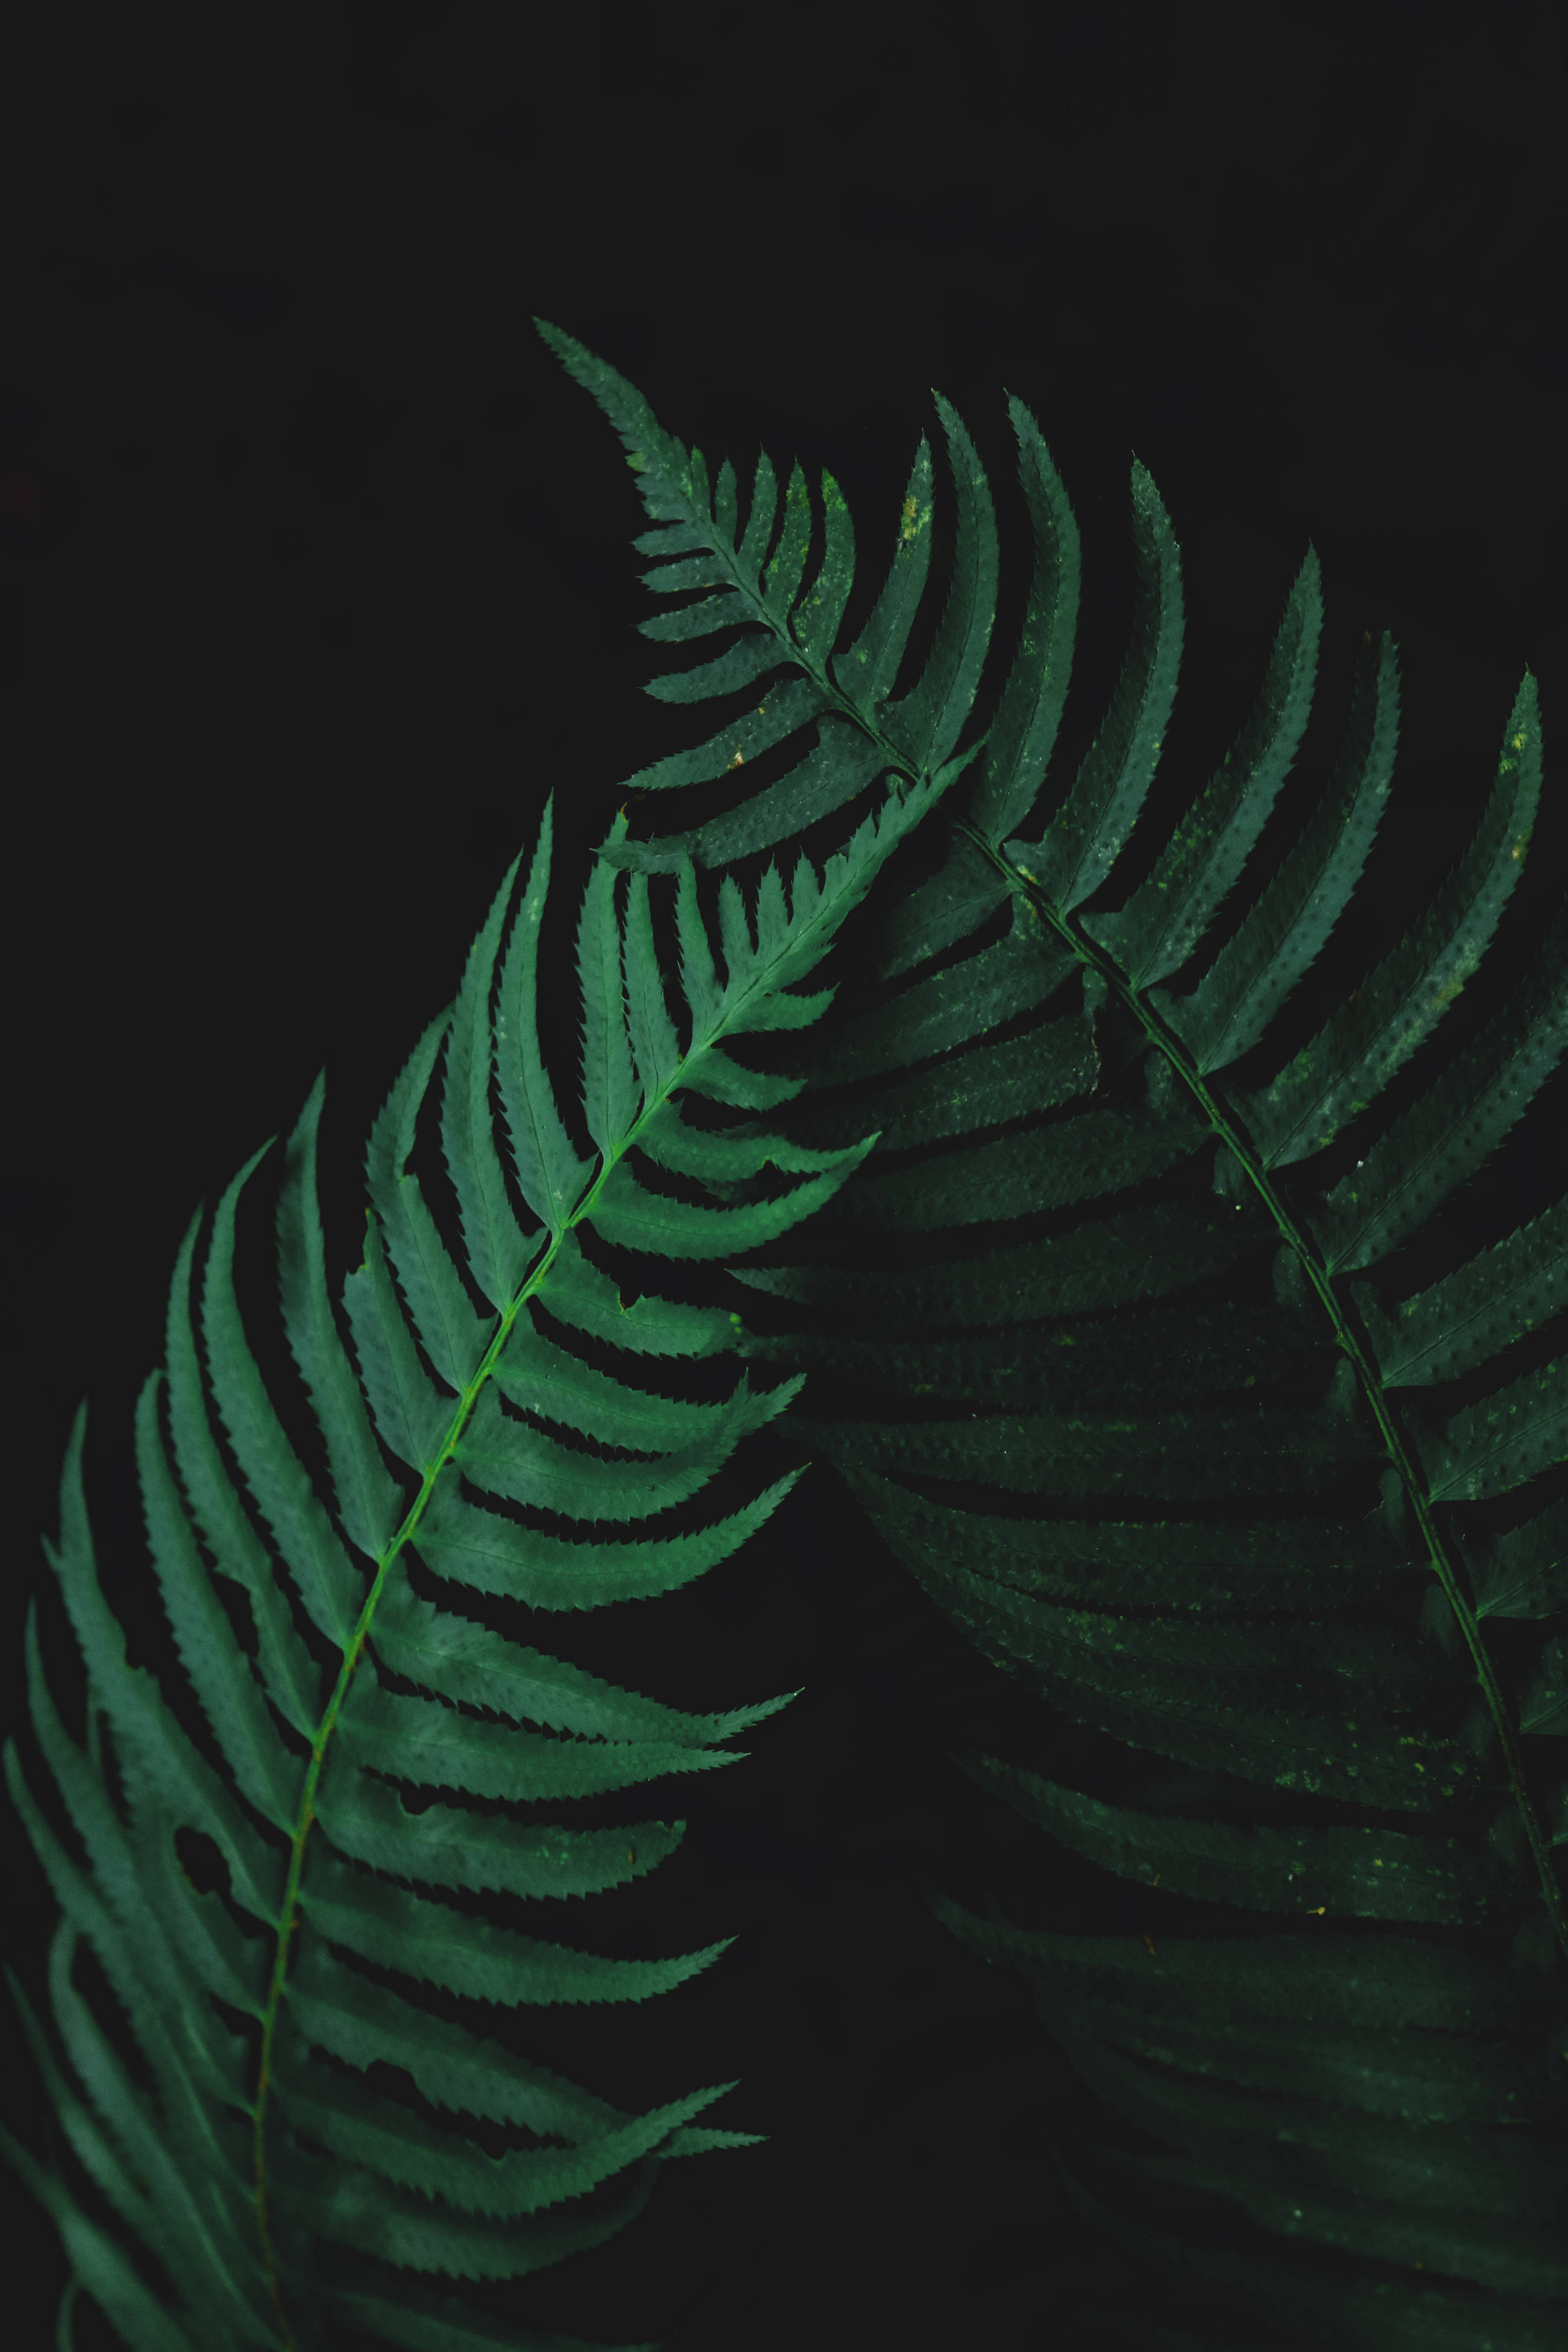 Nature's beauty is accentuated in these vibrant fern leaves. Wallpaper